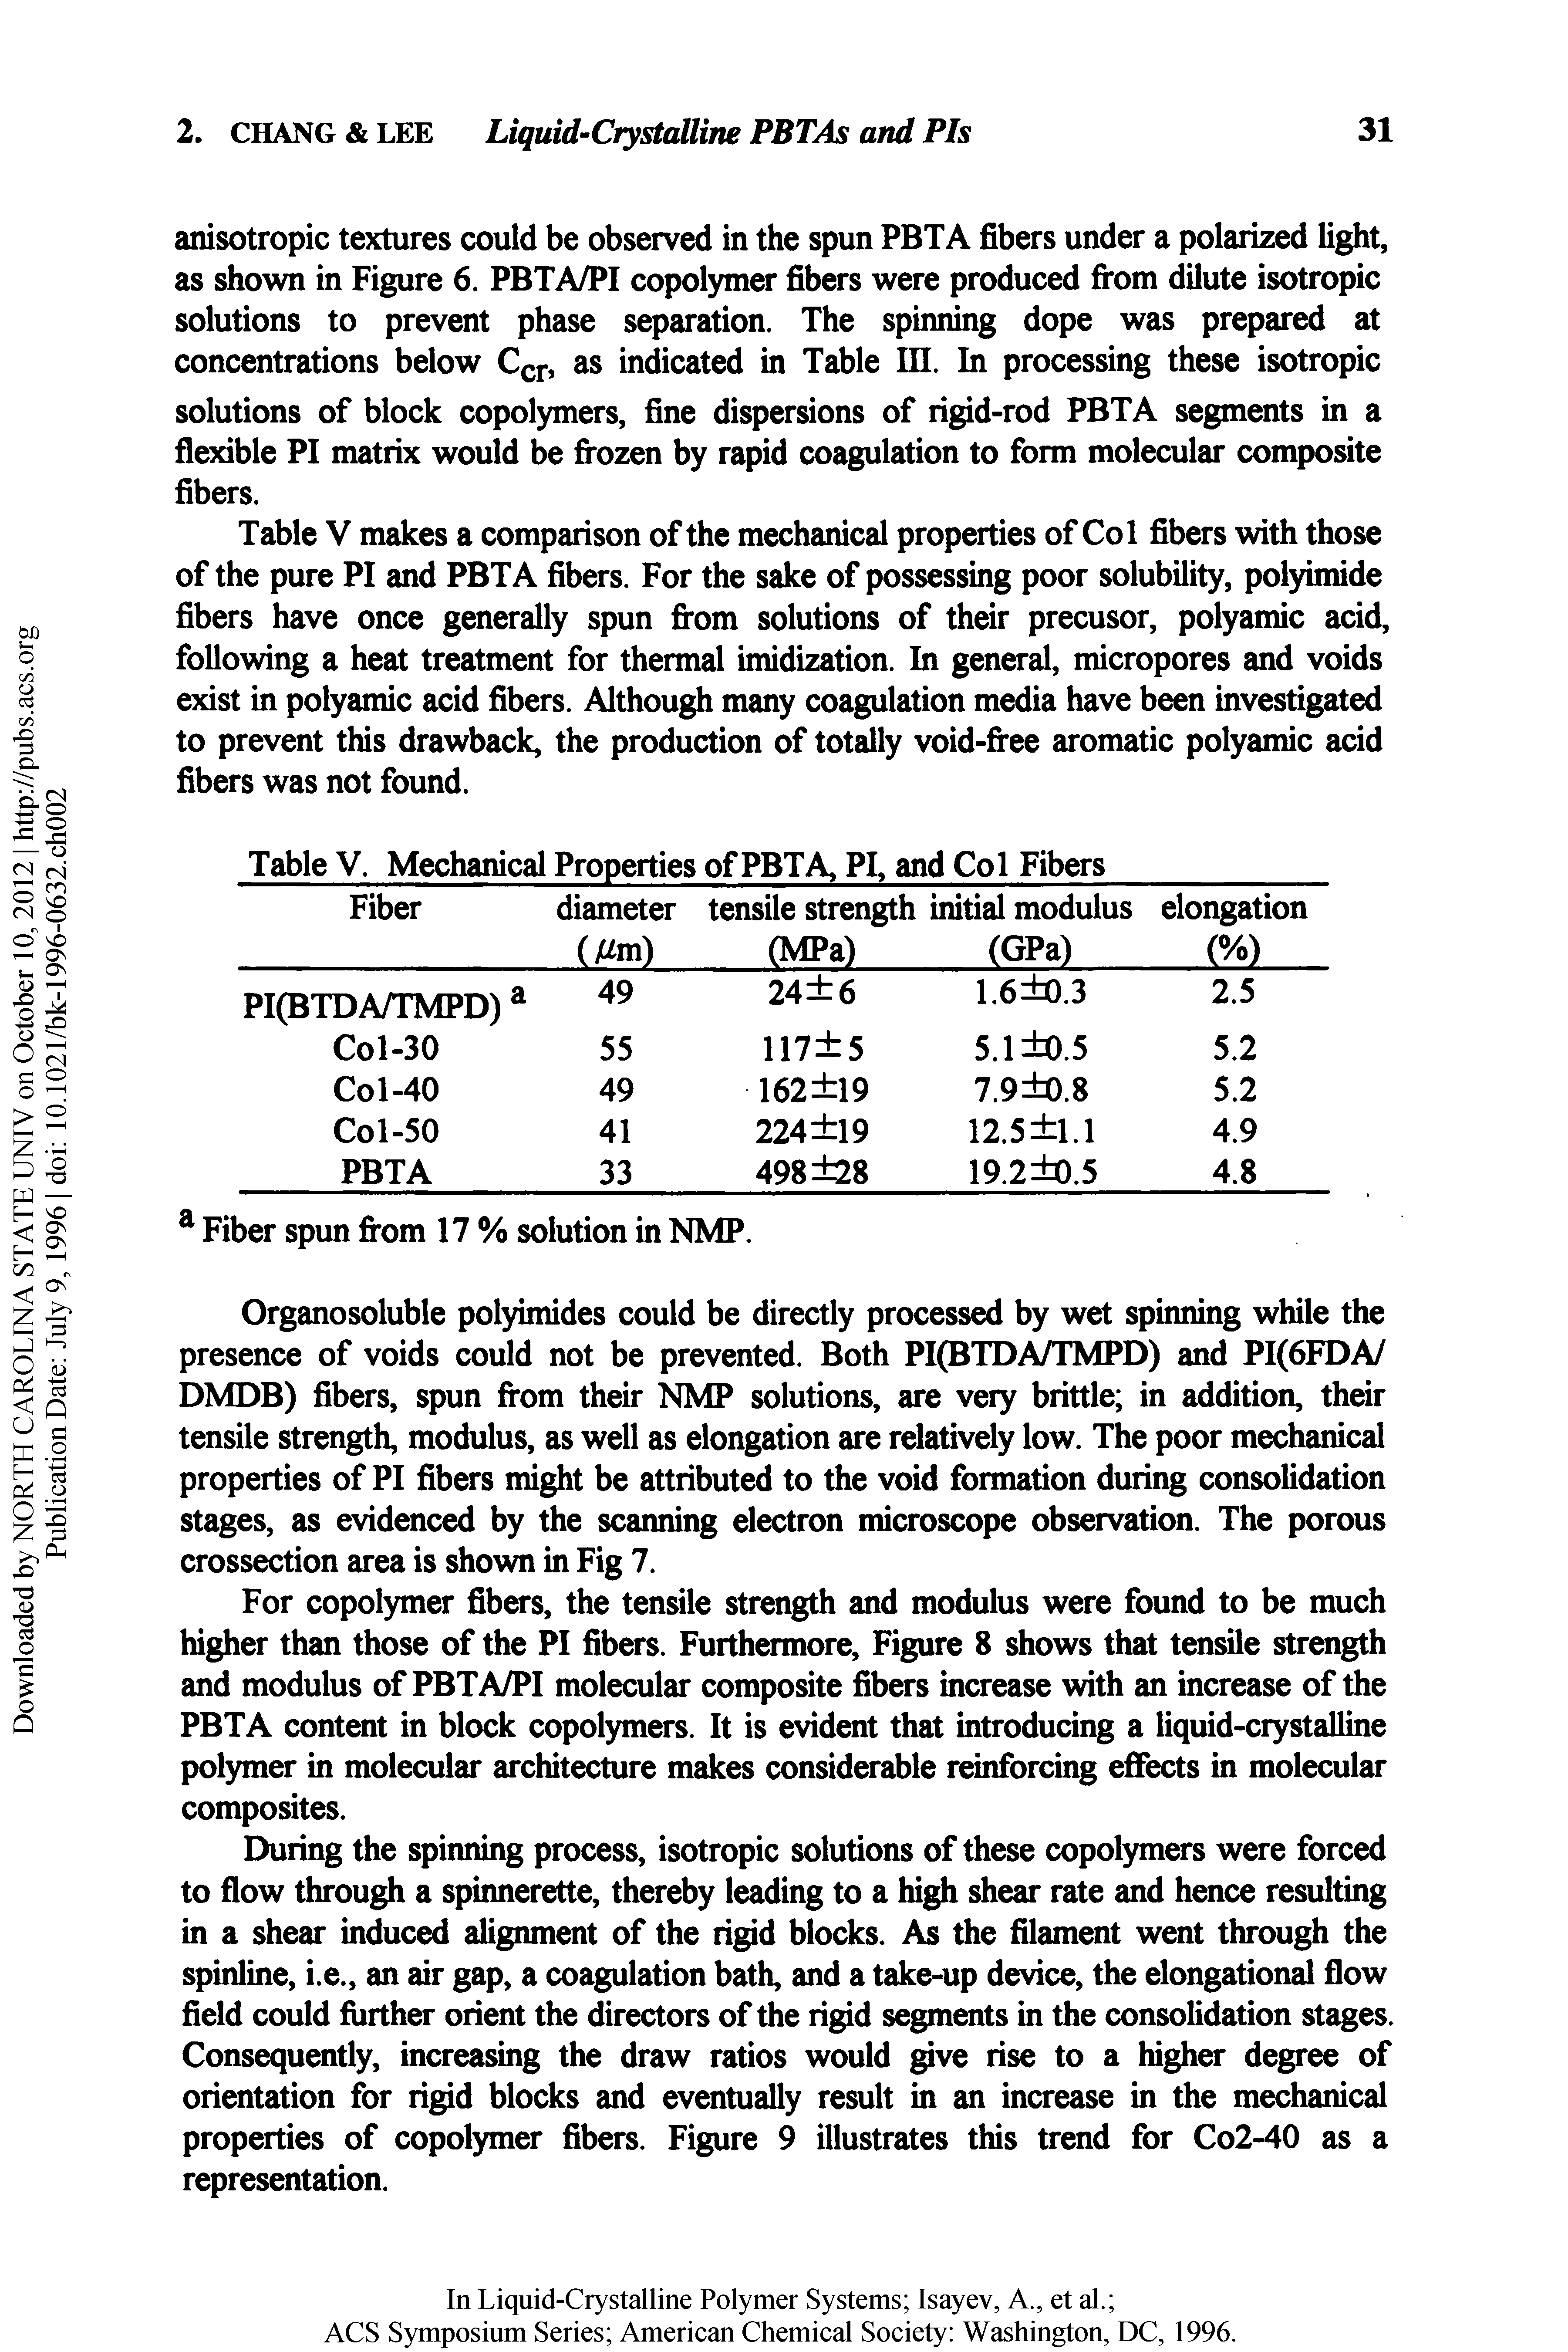 Table V makes a comparison of the mechanical properties of Col fibers with those of the pure PI and PBTA fibers. For the sake of possessing poor solubility, polyimide fibers have once generally spun fi-om solutions of their precusor, polyamic acid, following a heat treatment for thermal imidization. In general, micropores and voids exist in polyamic acid fibers. Although many coagulation media have been investigated to prevent this drawback, the production of totally void-fi ee aromatic polyamic add fibers was not found.